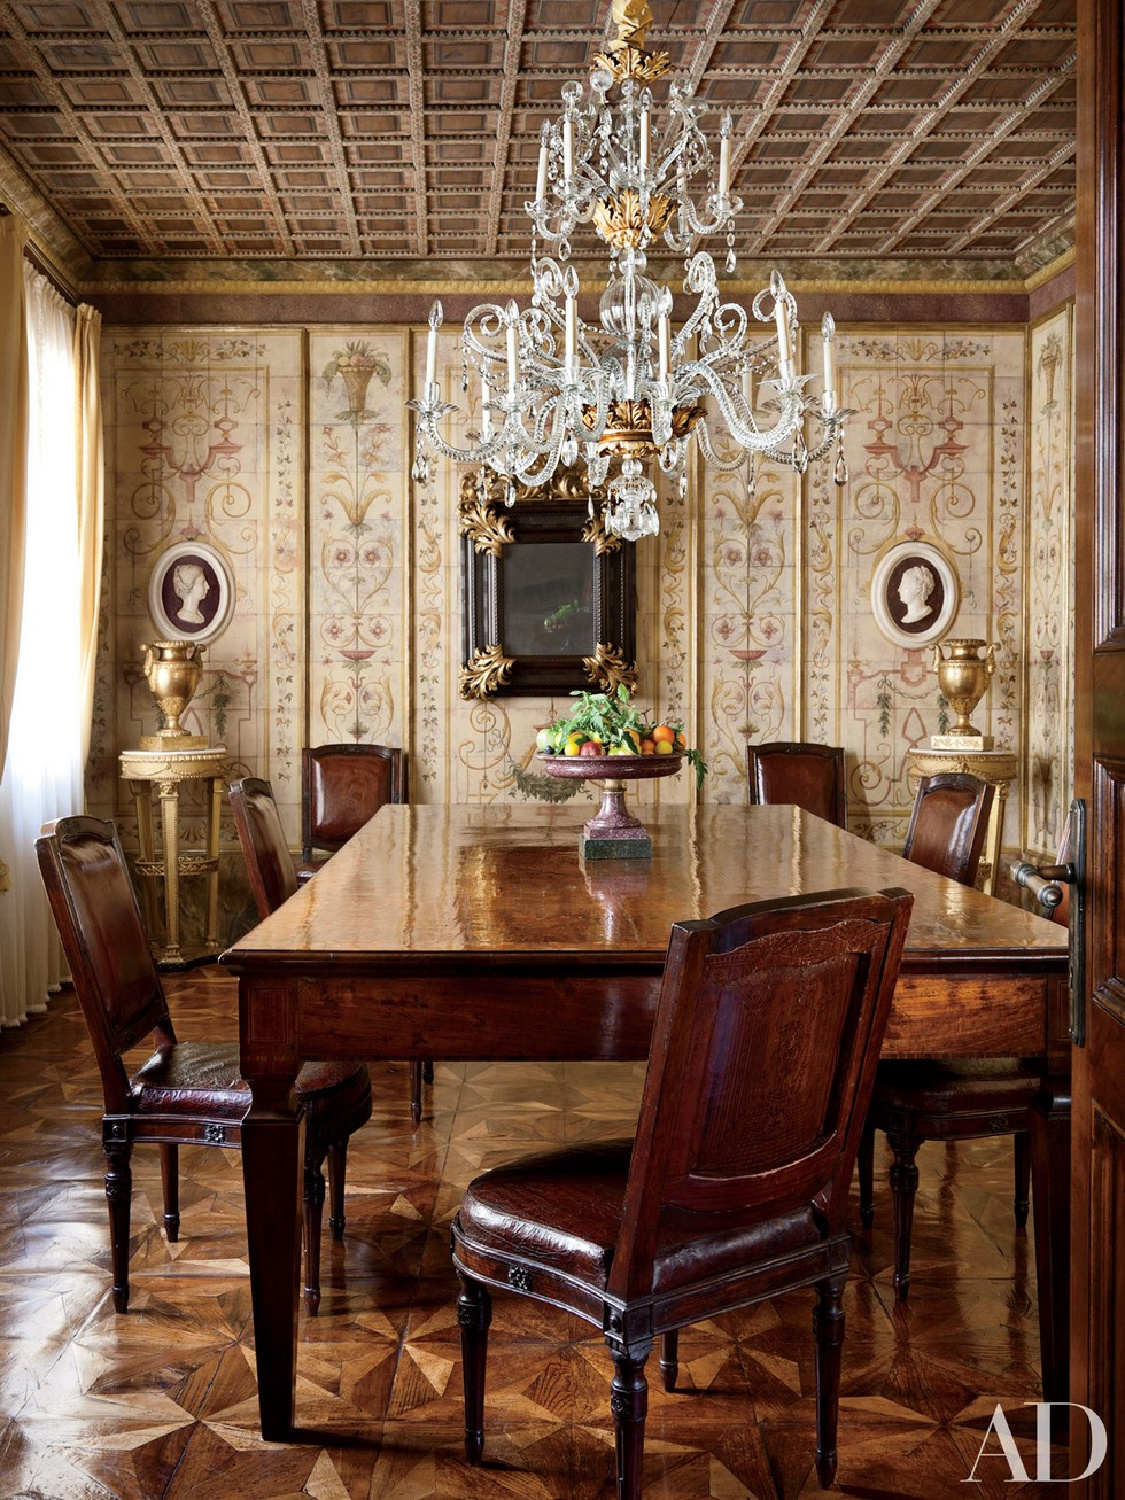 Studio Peregalli designed Old World style dining room in a Milan home featured in AD. #oldworldstyle #europeancountry #timelessdesign